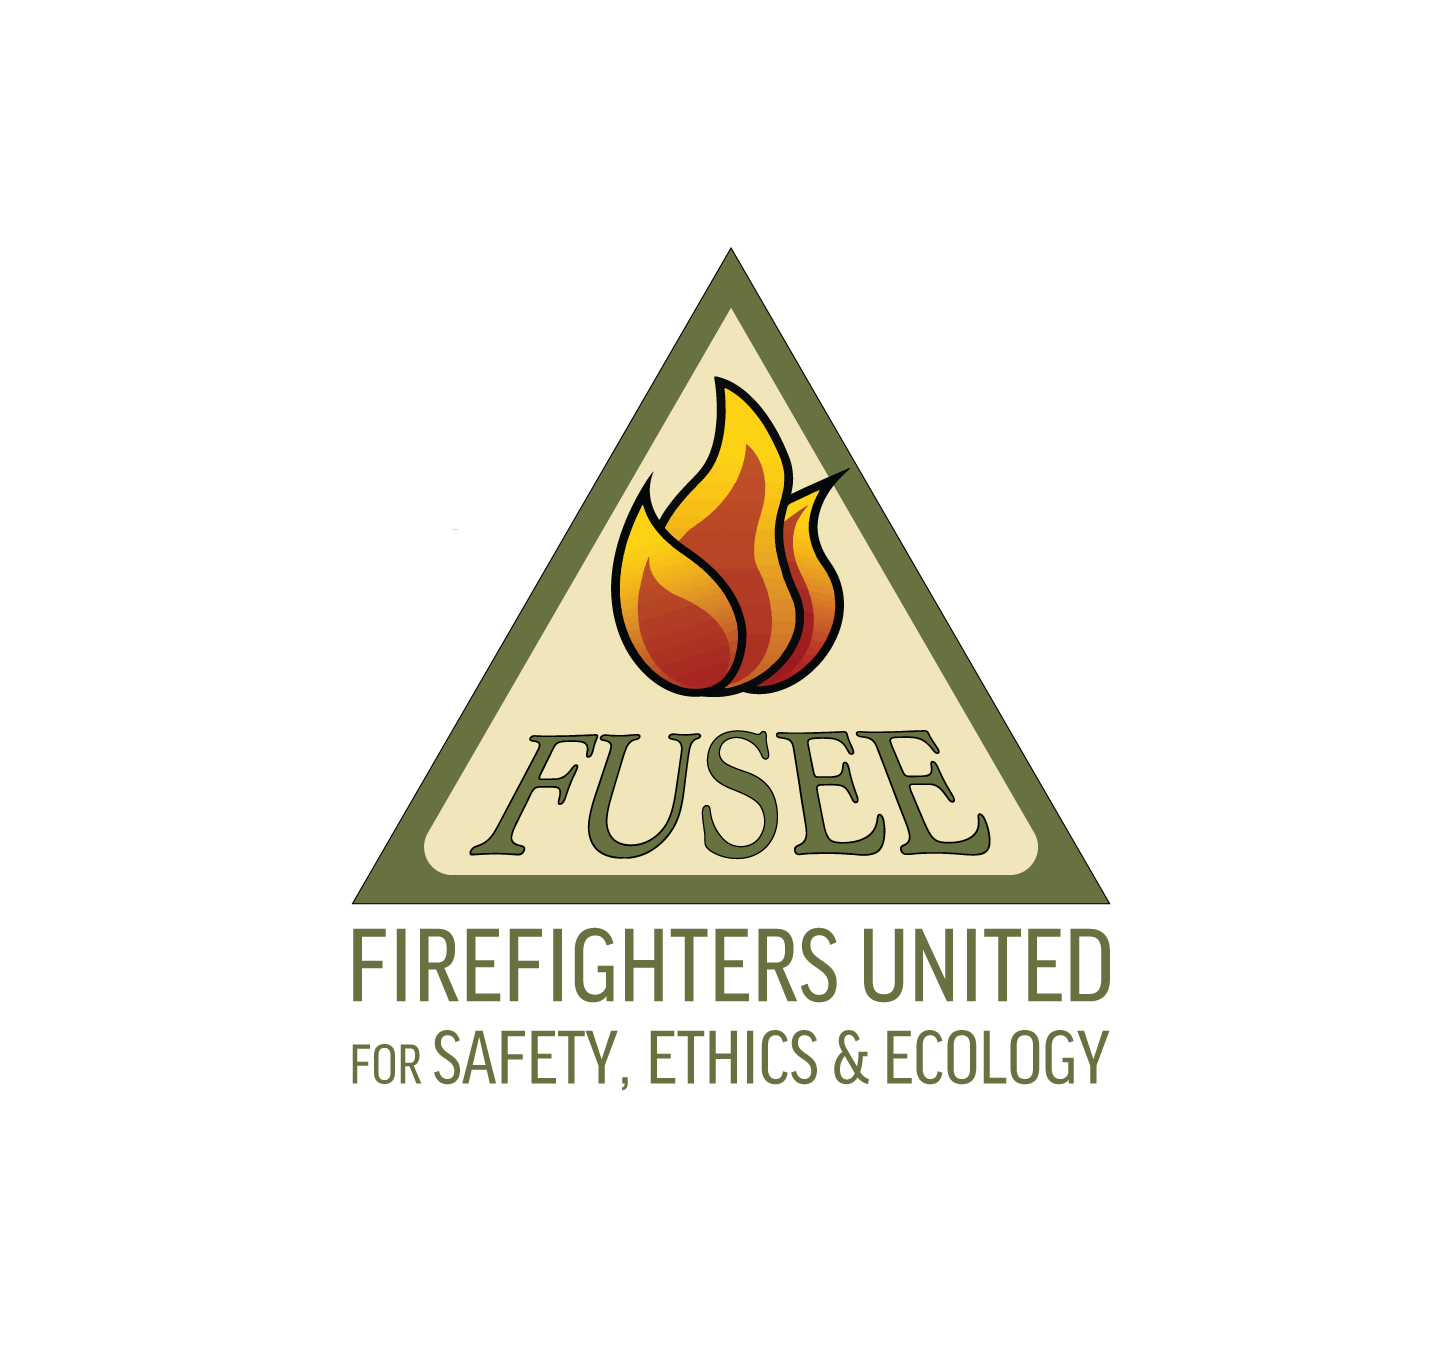 Firefighters United for Safety, Ethics & Ecology logo